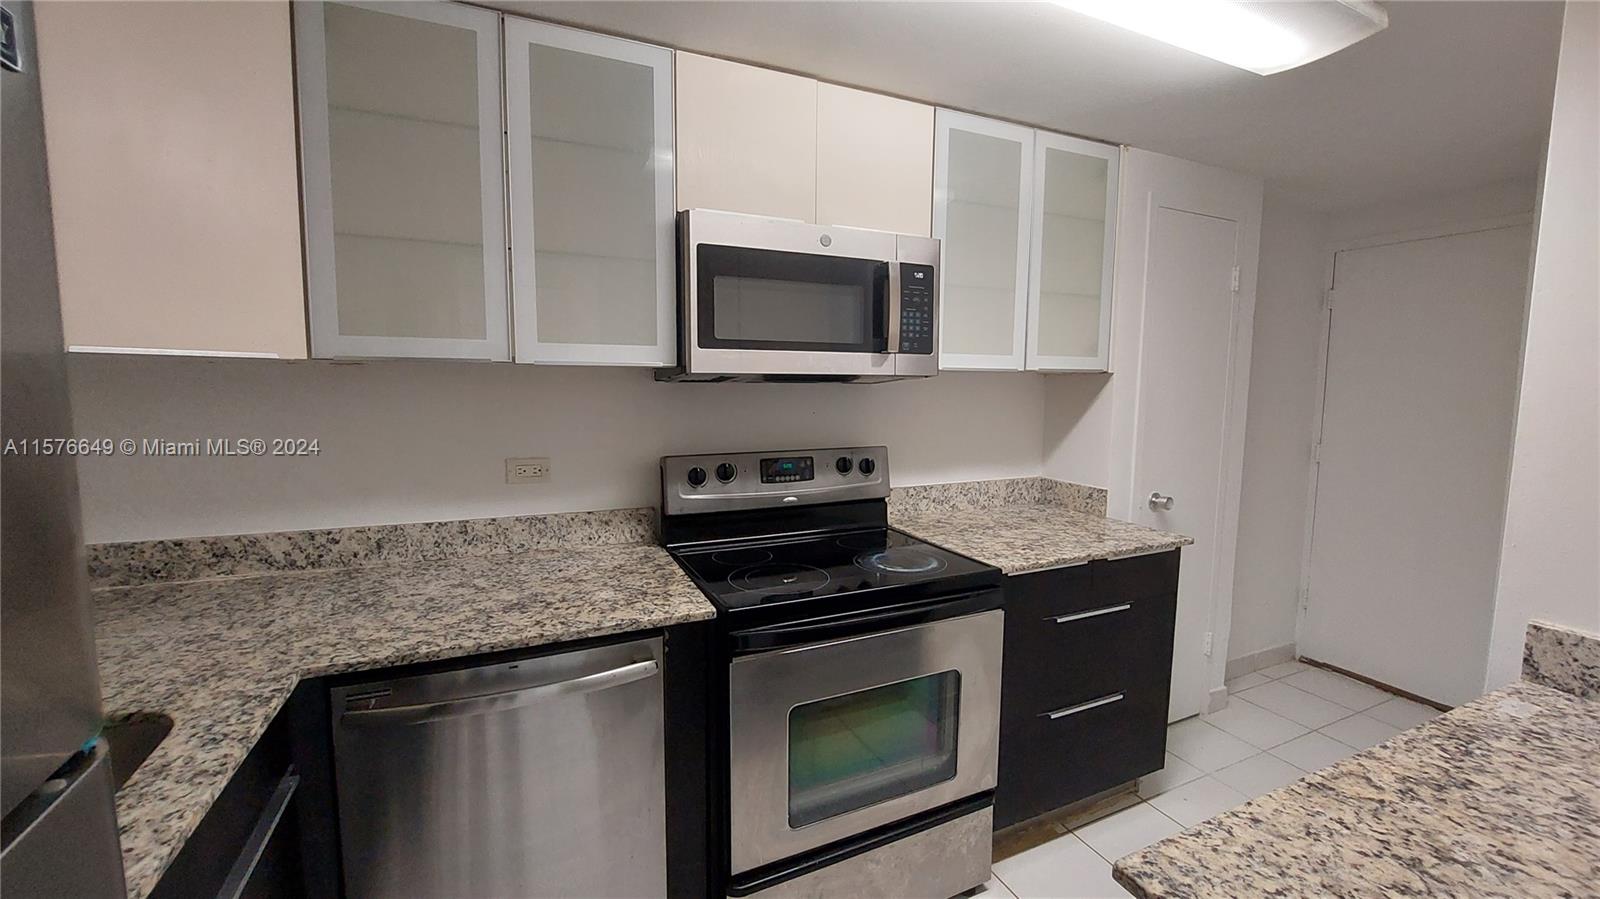 Studio for rent in the heart of Brickell, great location and nice city views! Amenities include 2 pools, gym & spa. Walking distance to restaurants, bars, grocery stores, Brickell City Center and more. Water and electricity included, unfurnished.